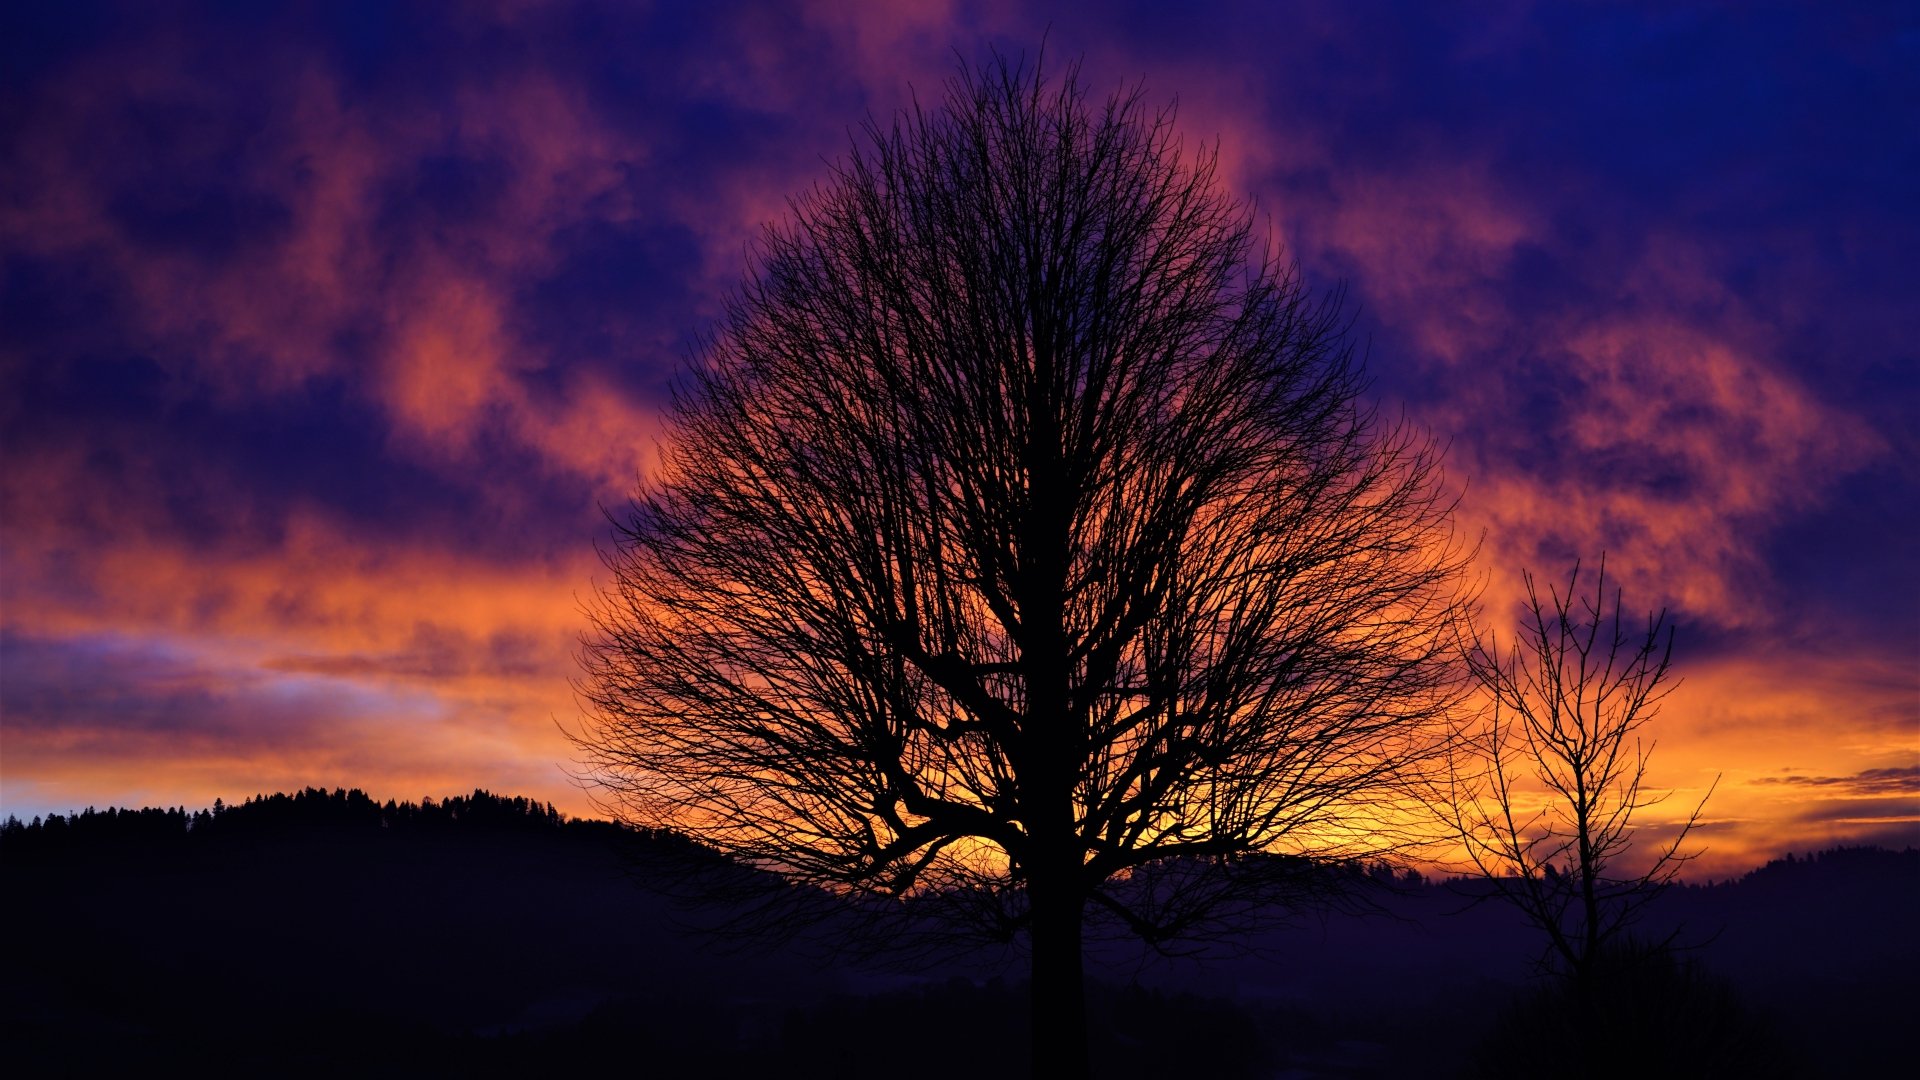 Tree Silhouette in the Sunset 8k Ultra HD Wallpaper | Background Image